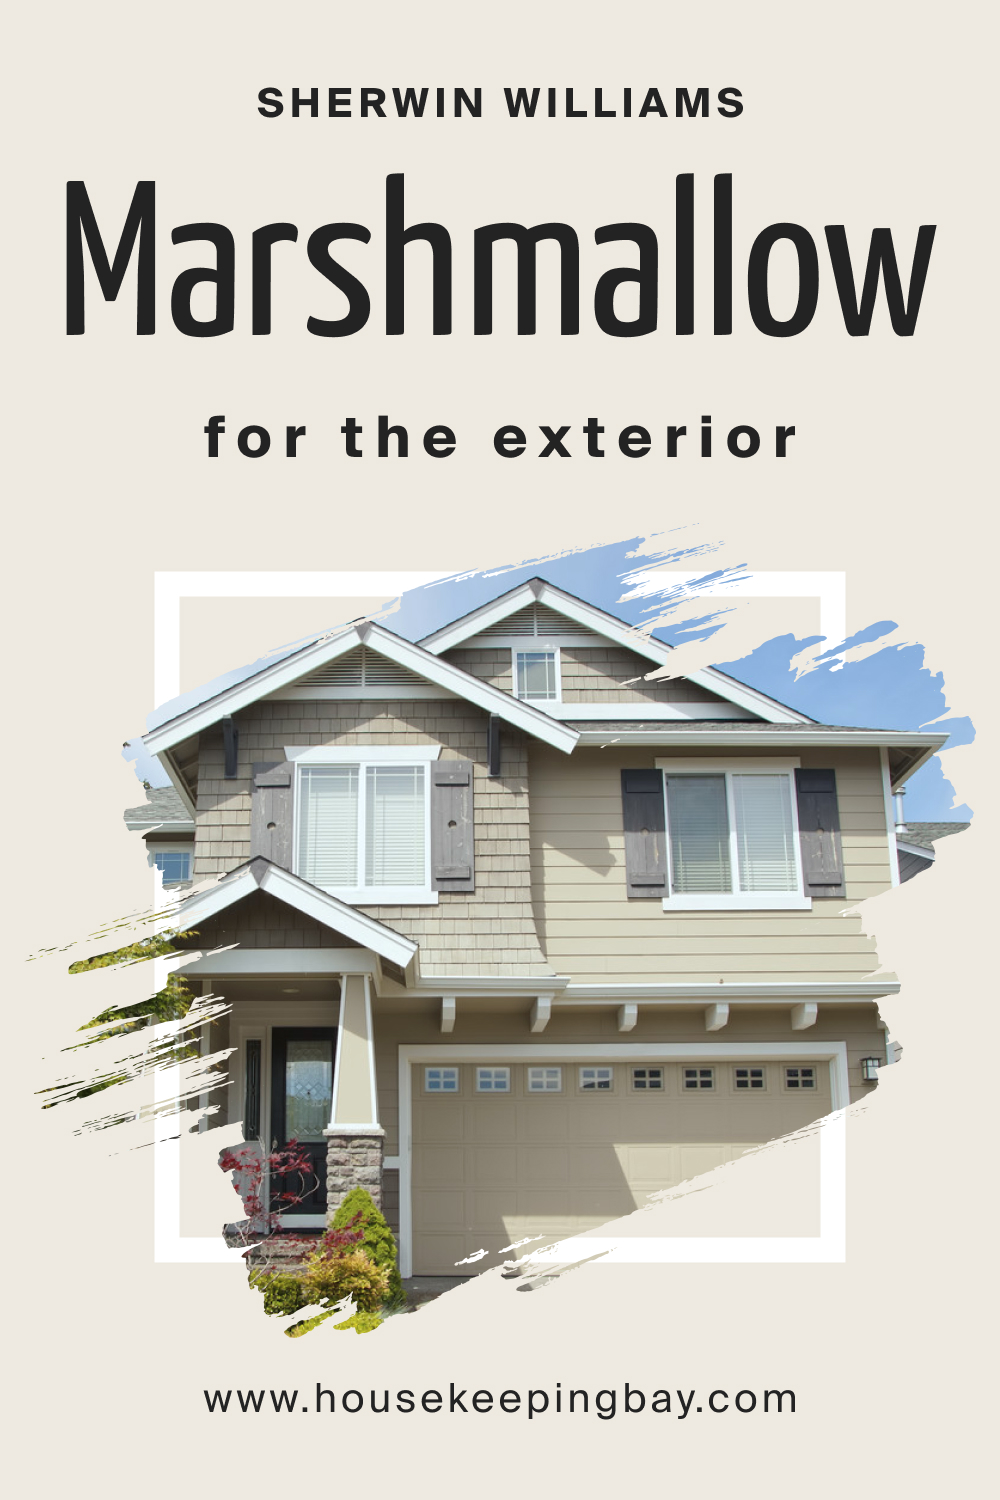 Sherwin Williams. SW Marshmallow For the exterior